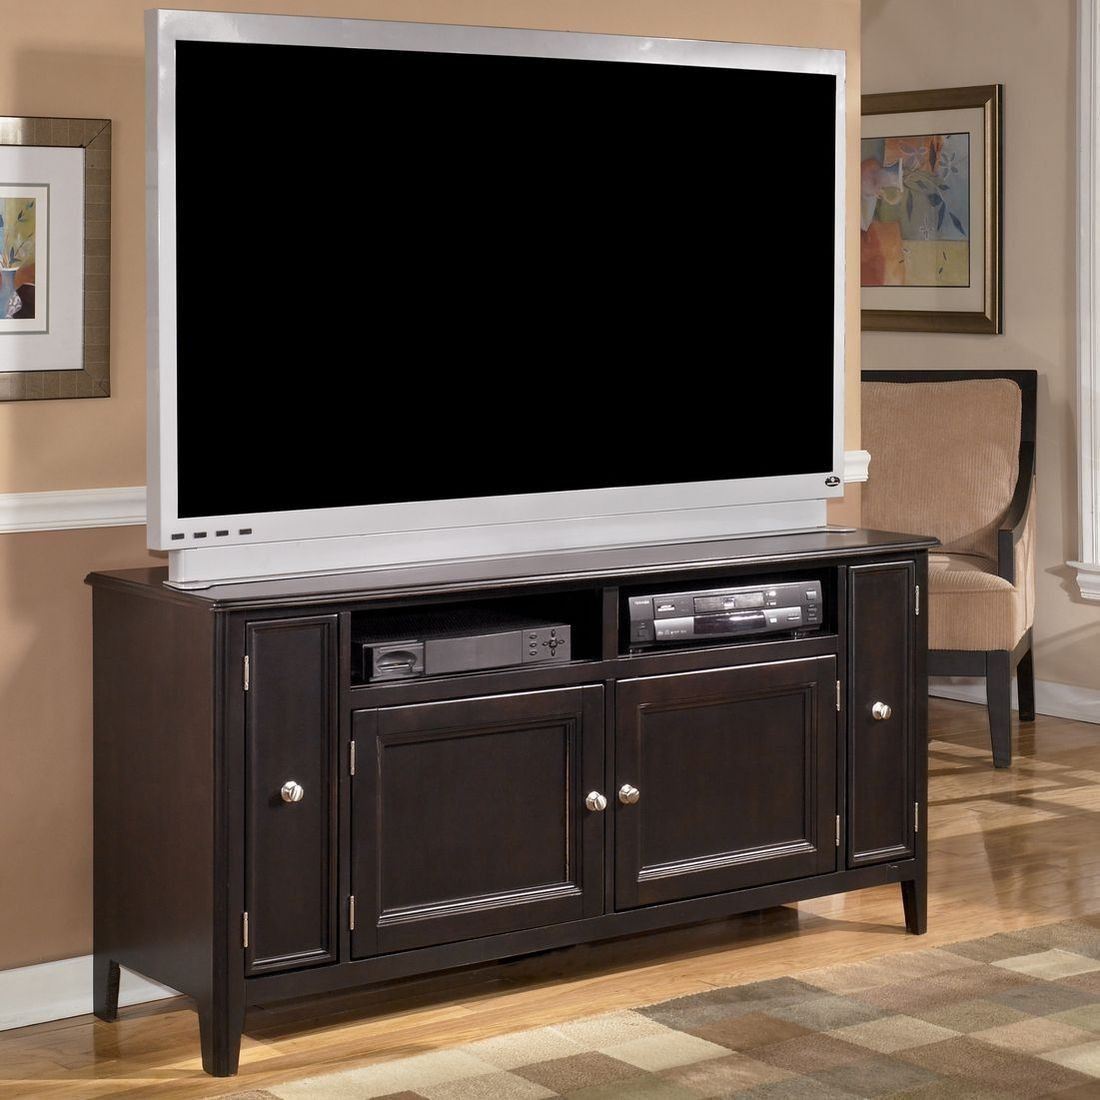 The Sleek Styling Of The Contemporary "carlyle Pertaining To Wide Tv Stands Entertainment Center Columbia Walnut/black (View 13 of 15)